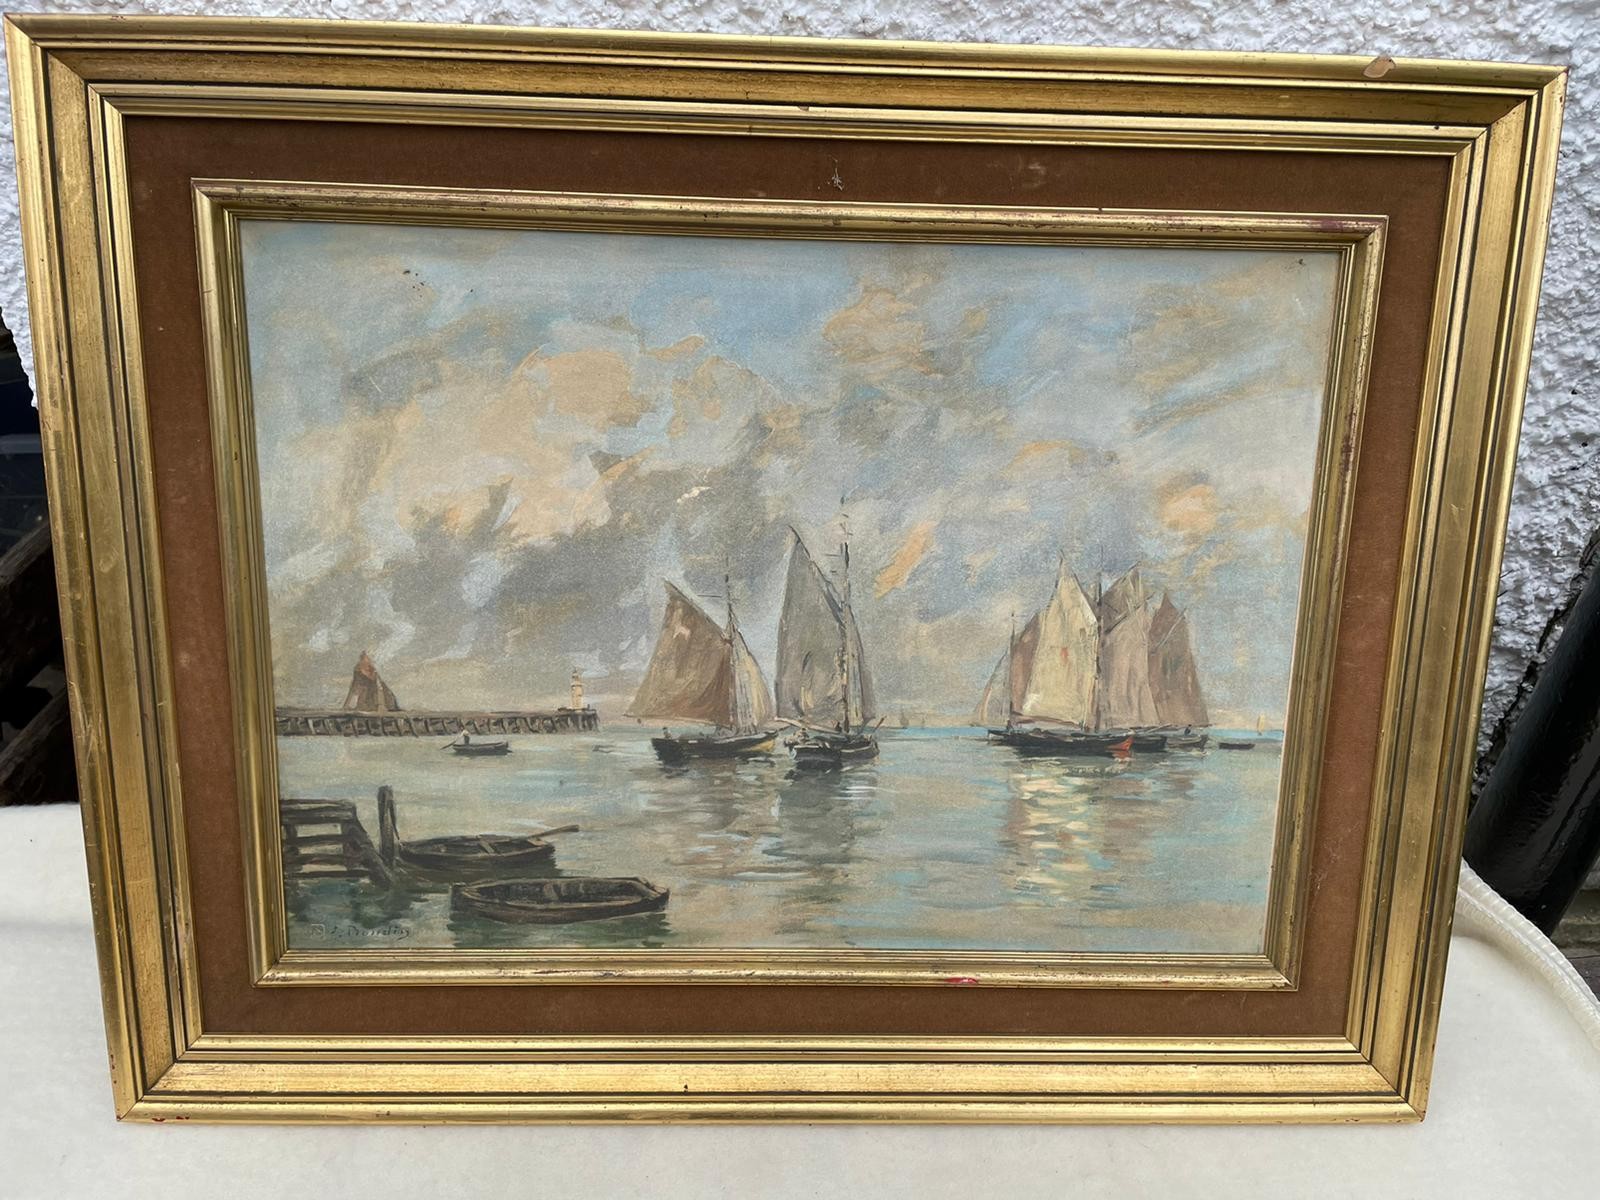 French limited edition print 236 " Eugene Bouldin bateaux de peche D trouville ' The fishing boats - Image 3 of 3